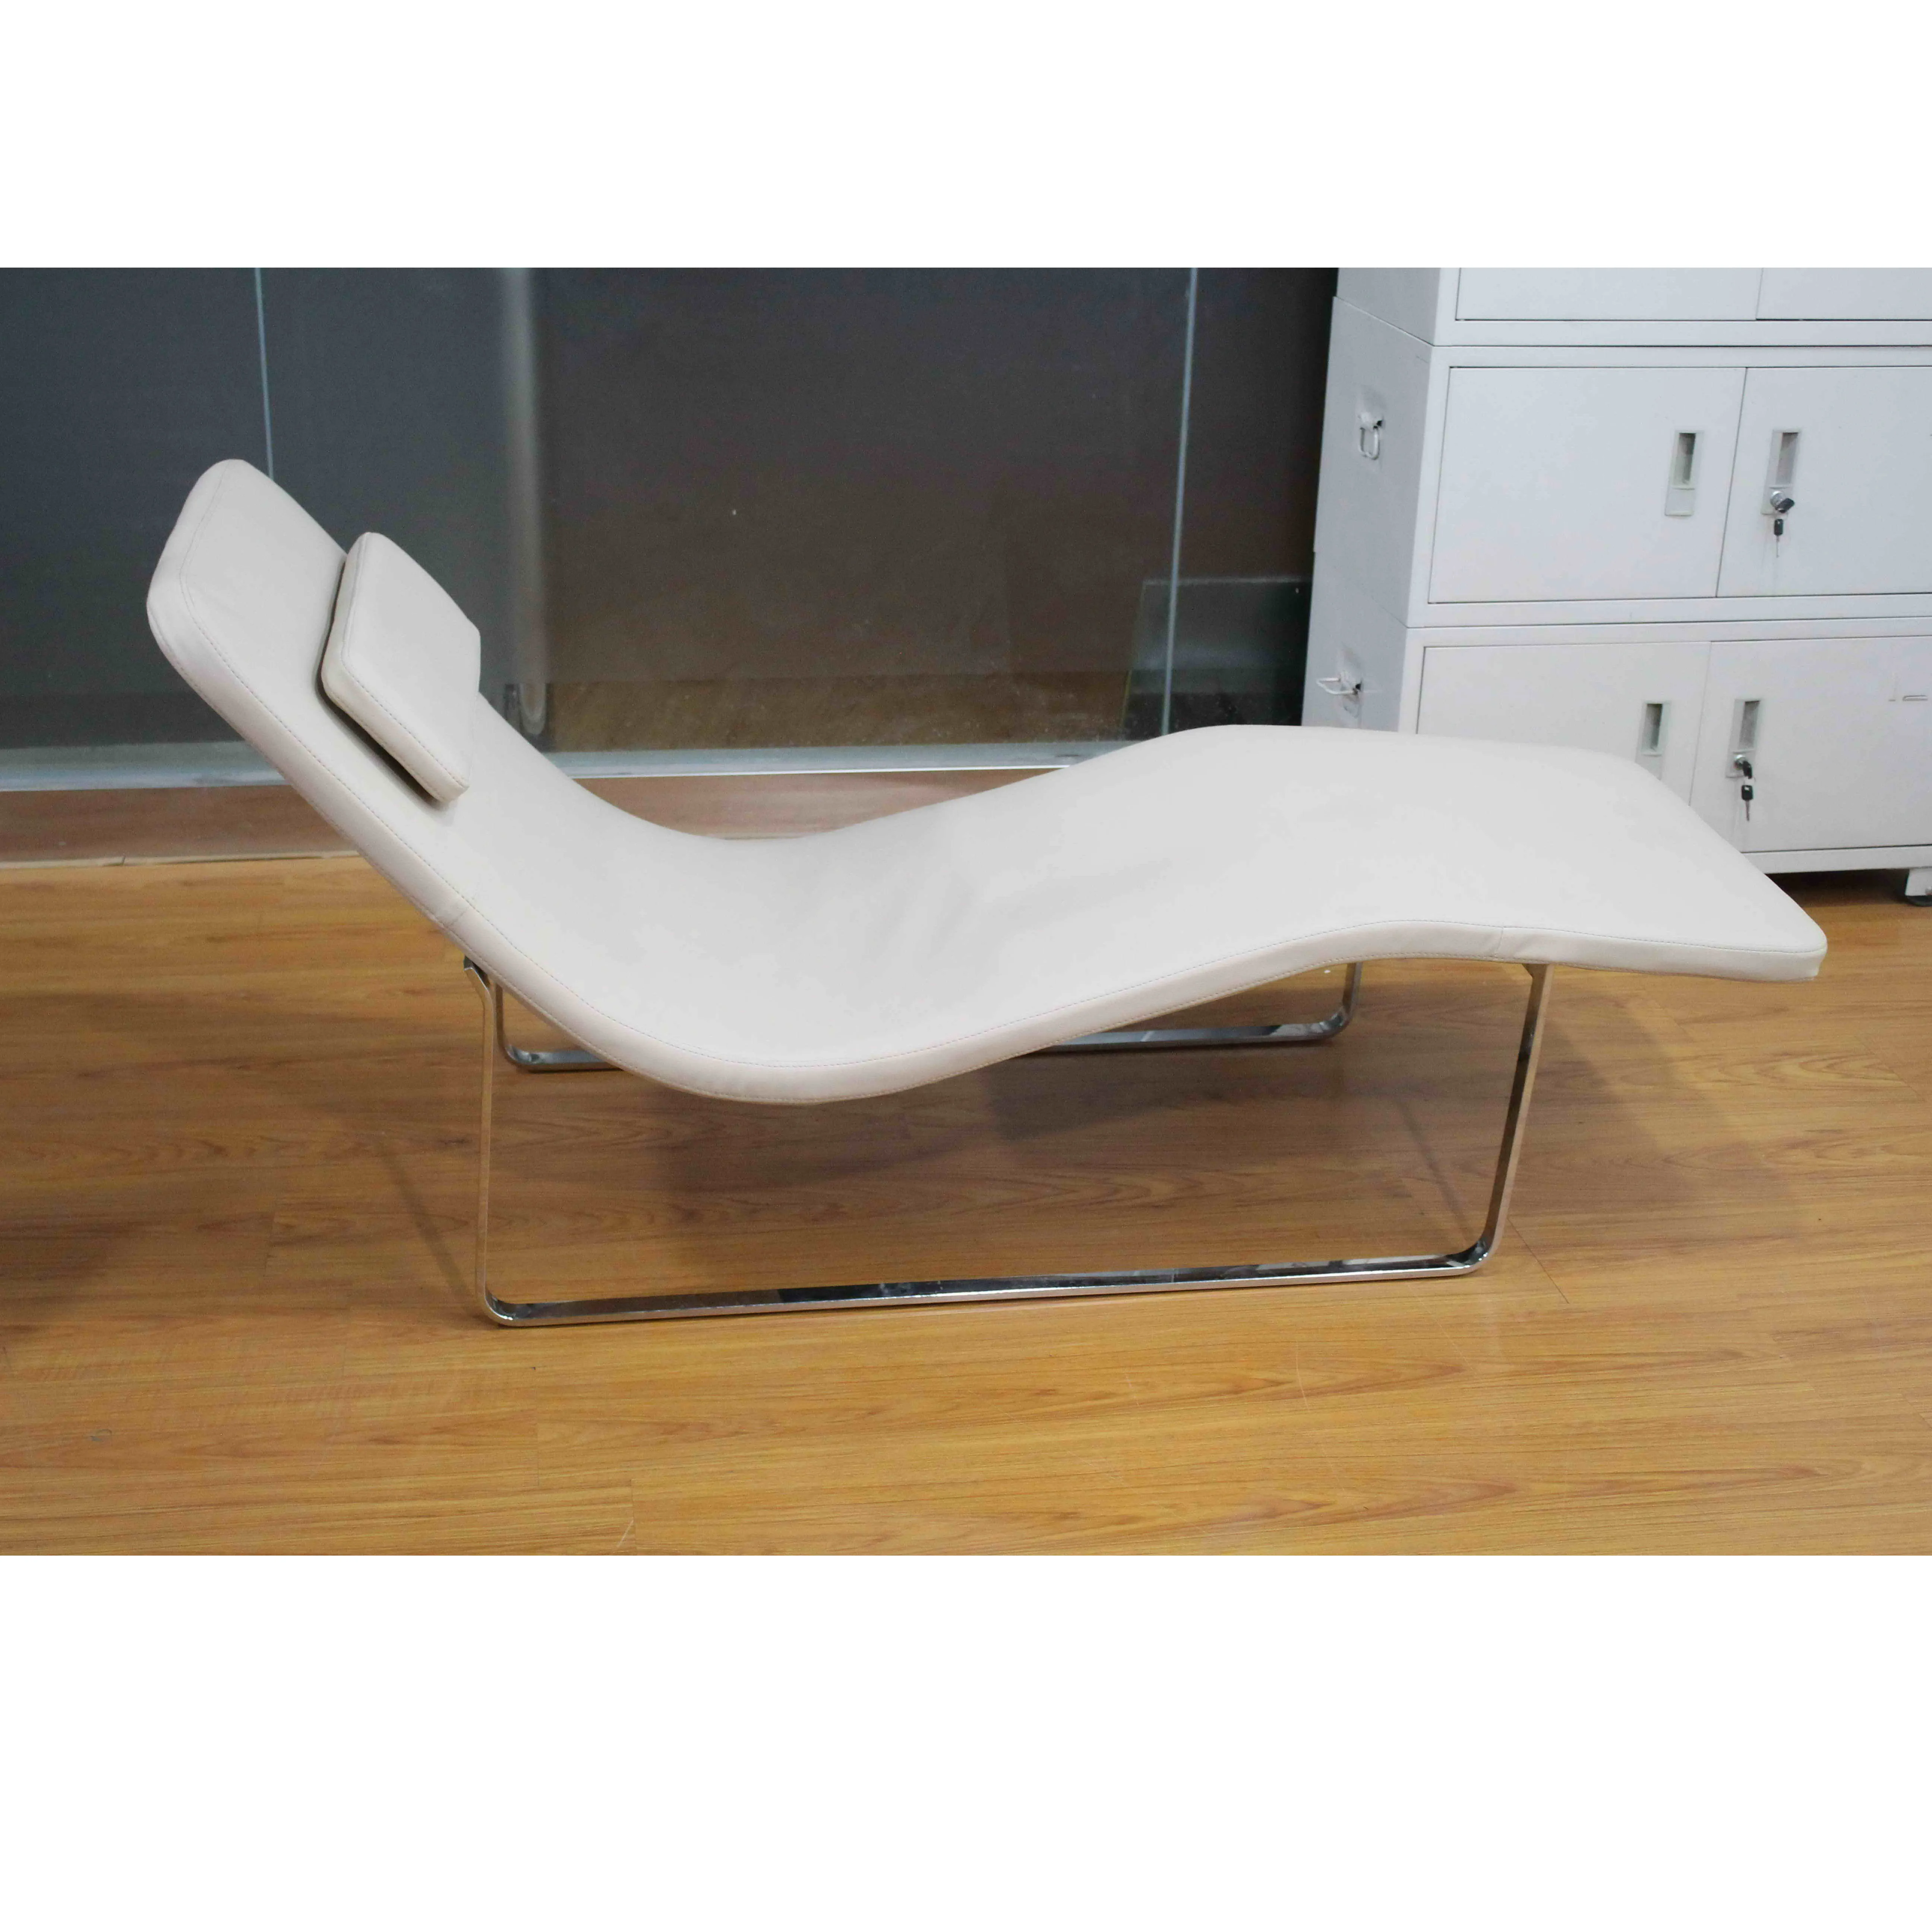 Modern Chaise Lounge Indoor Living Room Wholesale Furniture European Style Stainless Steel Fabric Chaise Lounge Chair Buy Chaise Lounge